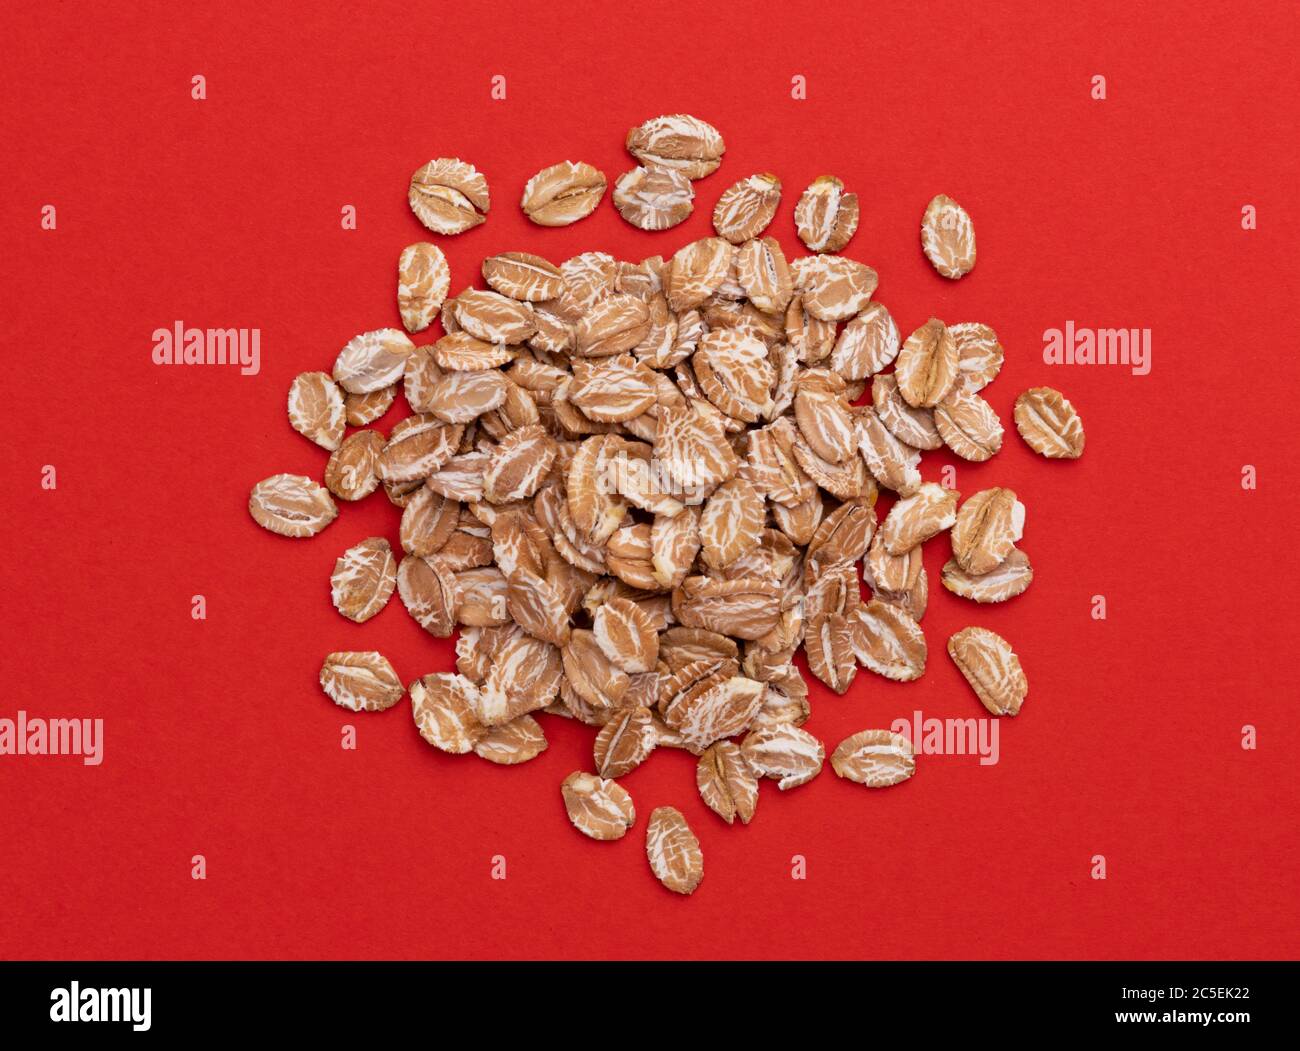 Rye flakes on red color background, top view Stock Photo